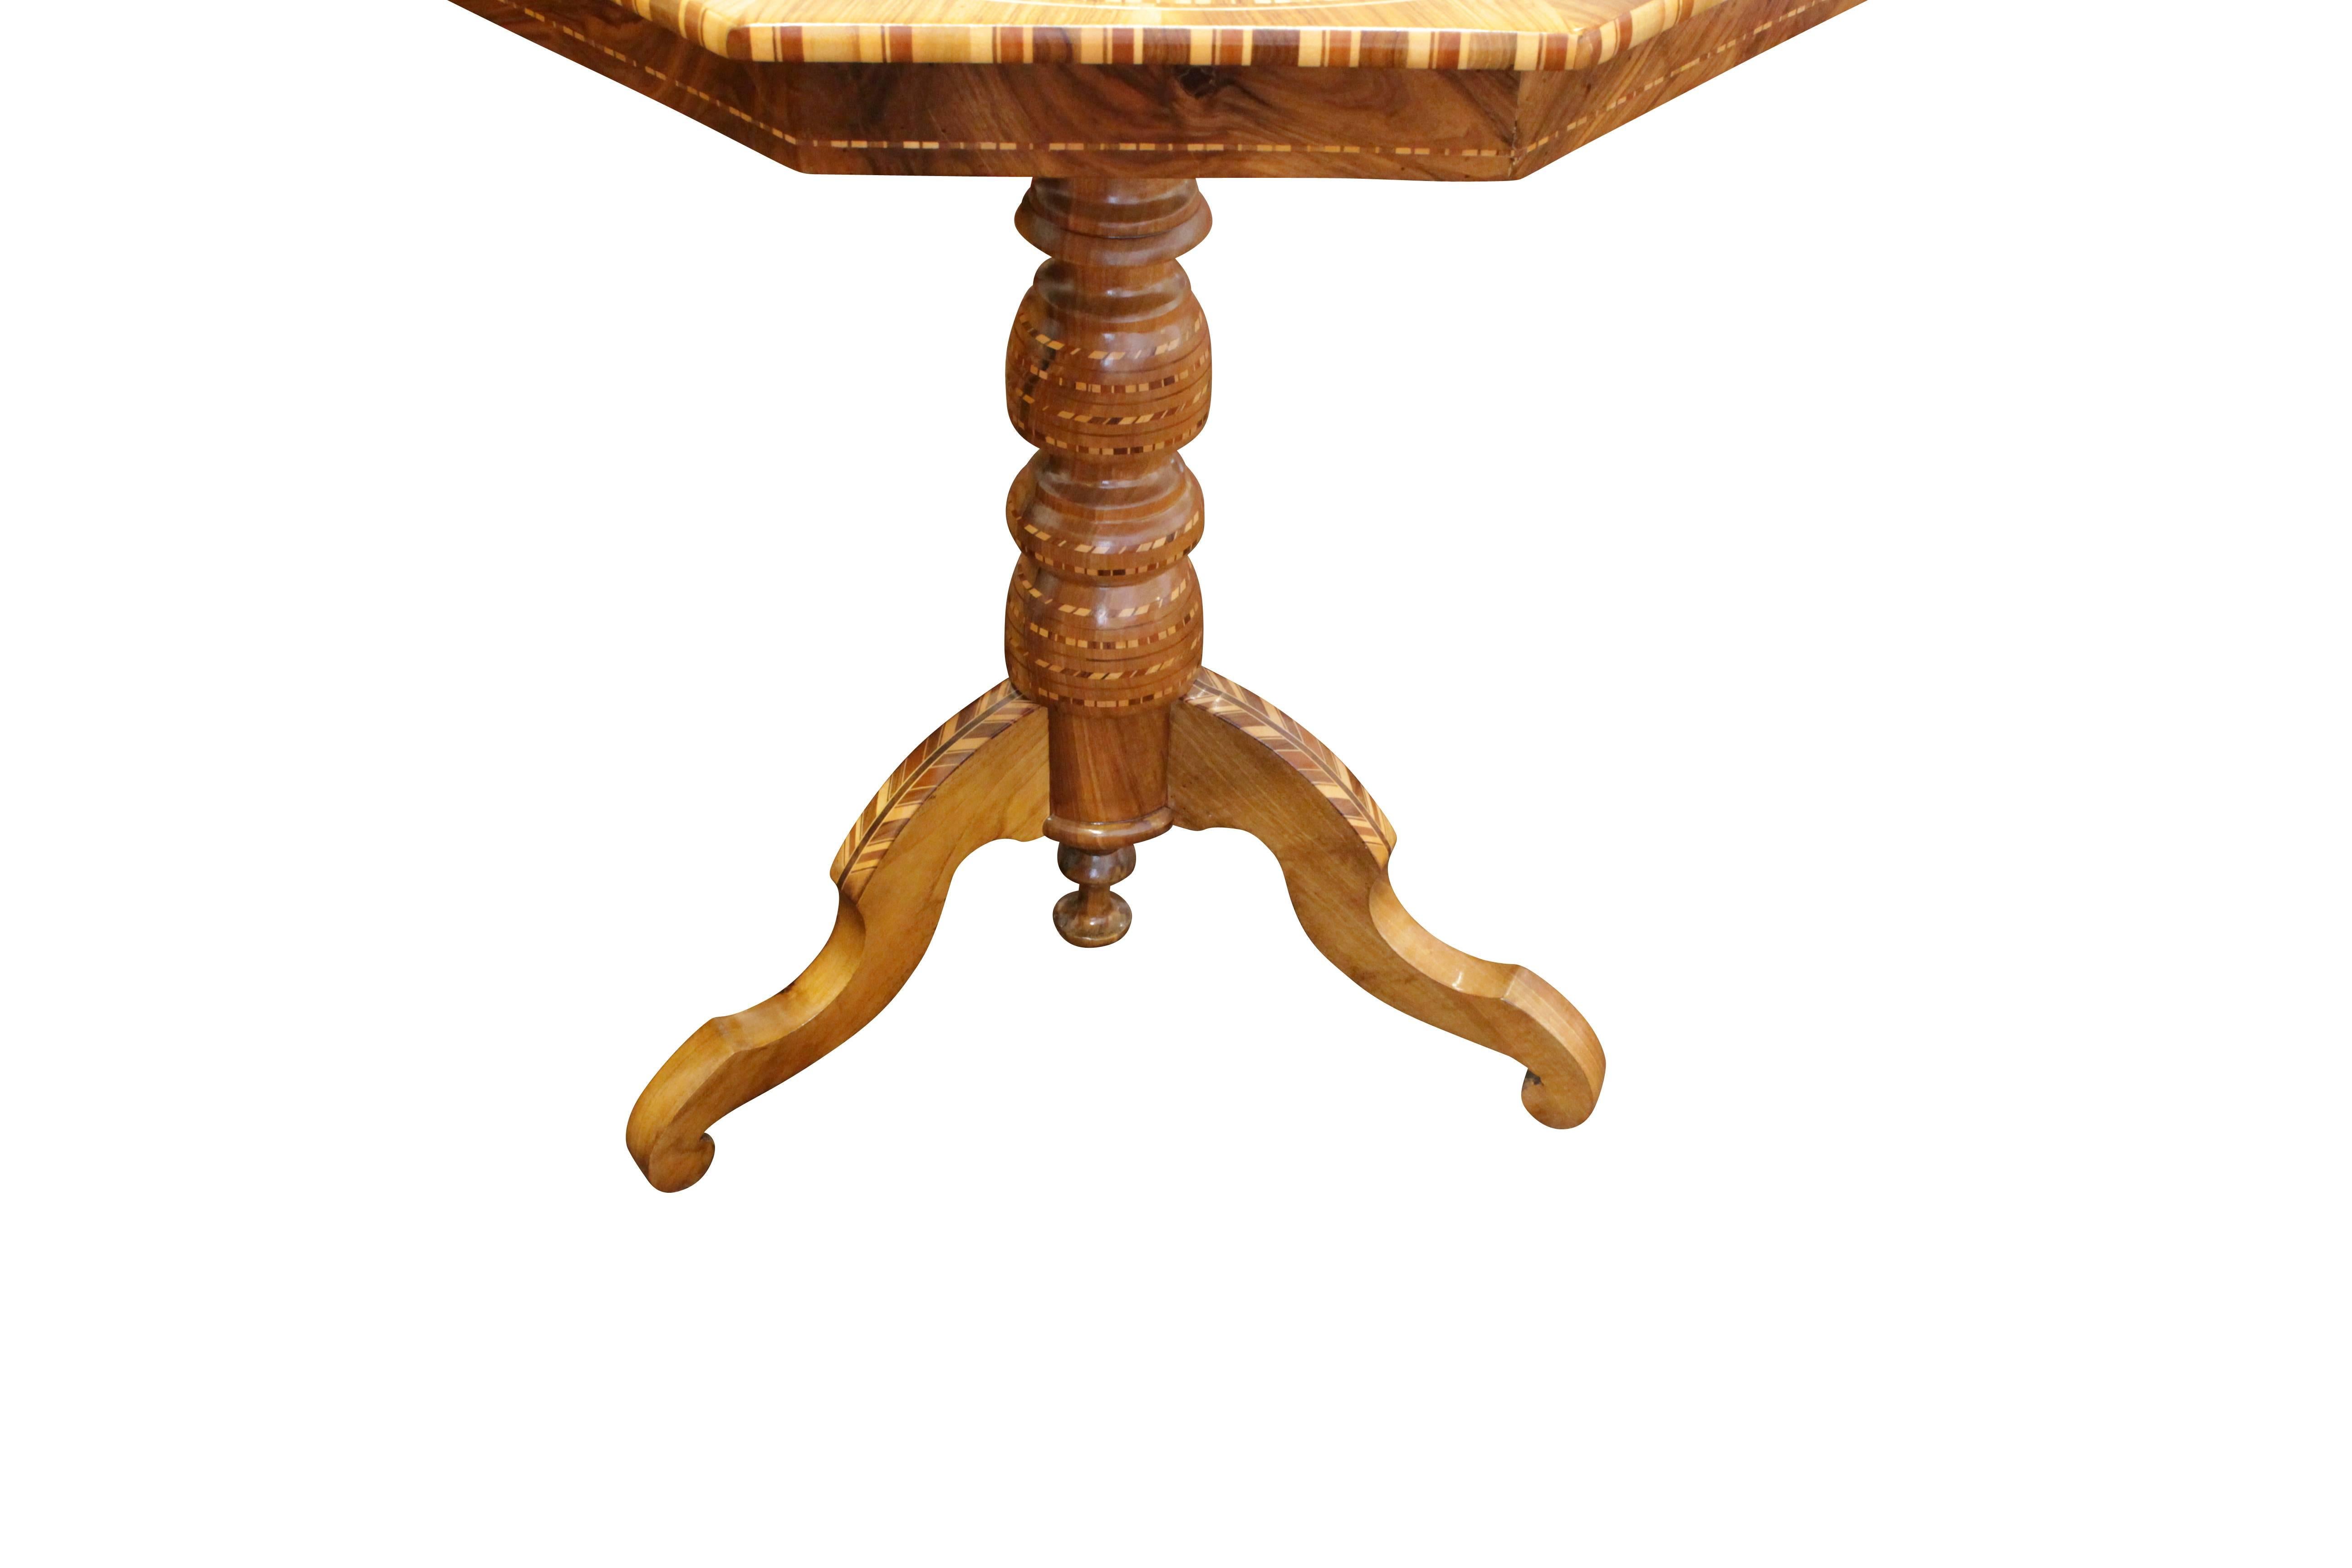 The walnut table stands on a central baluster column which itself rests on four booms at the bottom. On the tabletop is a very beautiful marquetry work. The table has been restored lovingly, and the condition is very good.